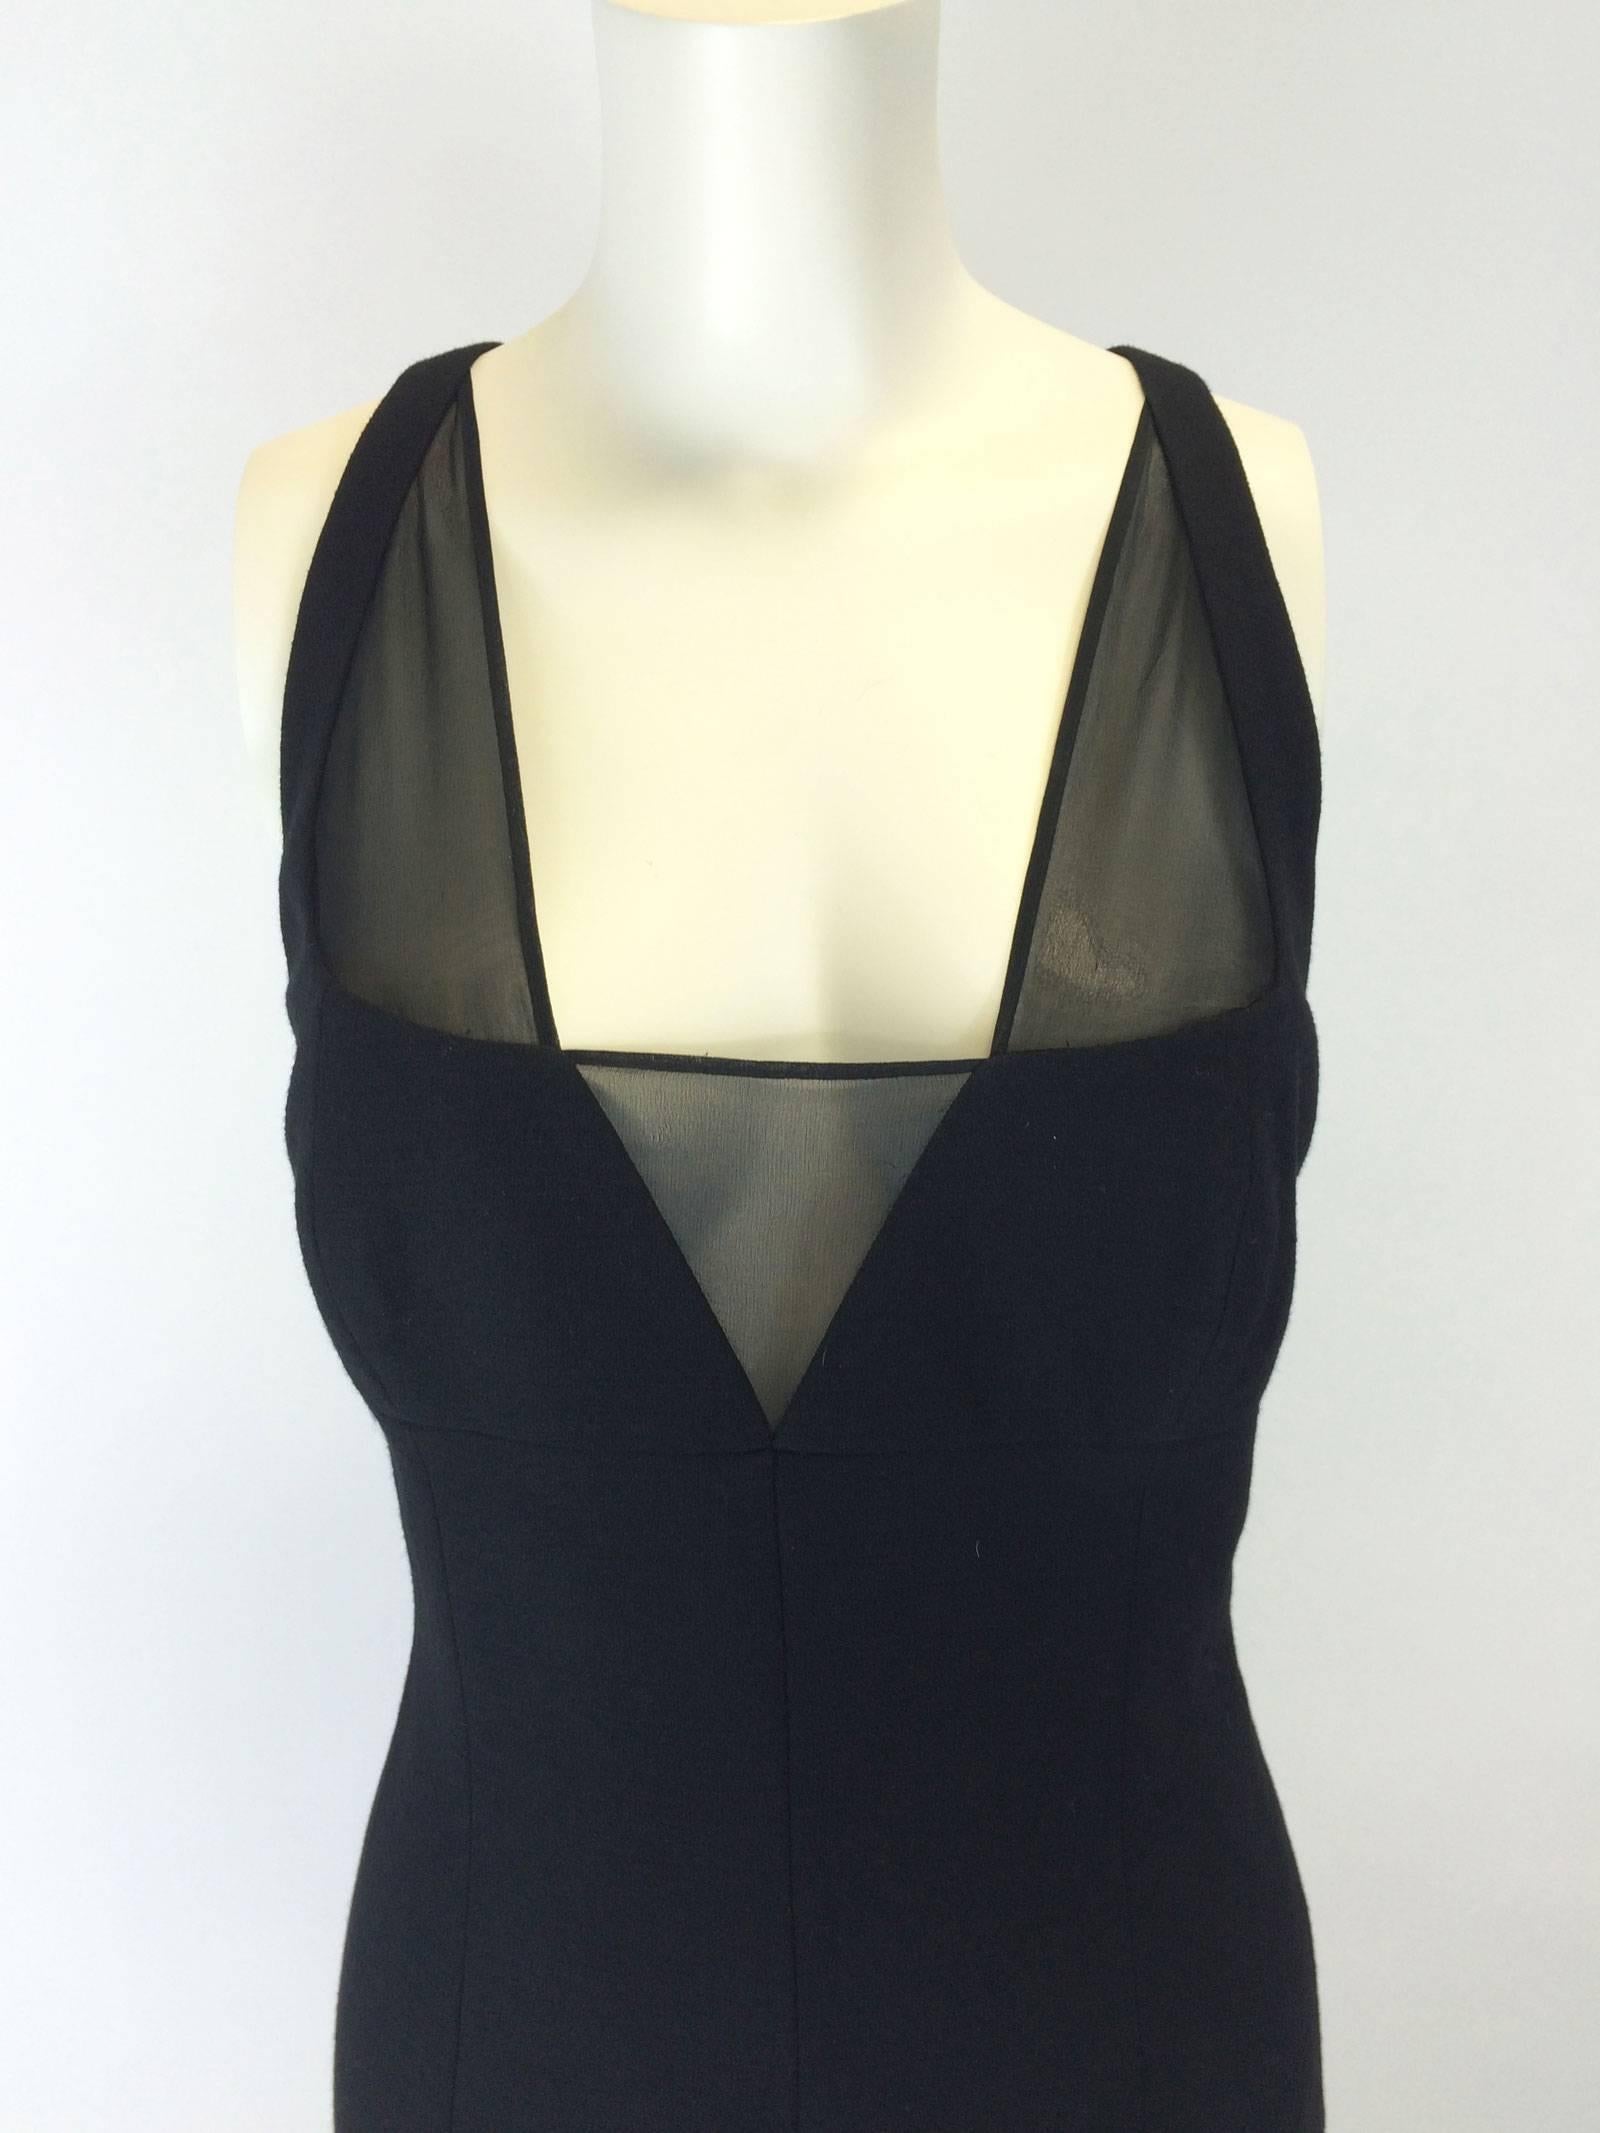 Sexy fitted black Versace dress.
Detailed seaming on bust, empire waist.
Deep neckline with sheer inserts.
Criss cross back.
Stretchy, heavier weight elastane and wool blend.
Back kick pleat.
Back zipper.
Lined.
Tagged a size 42.